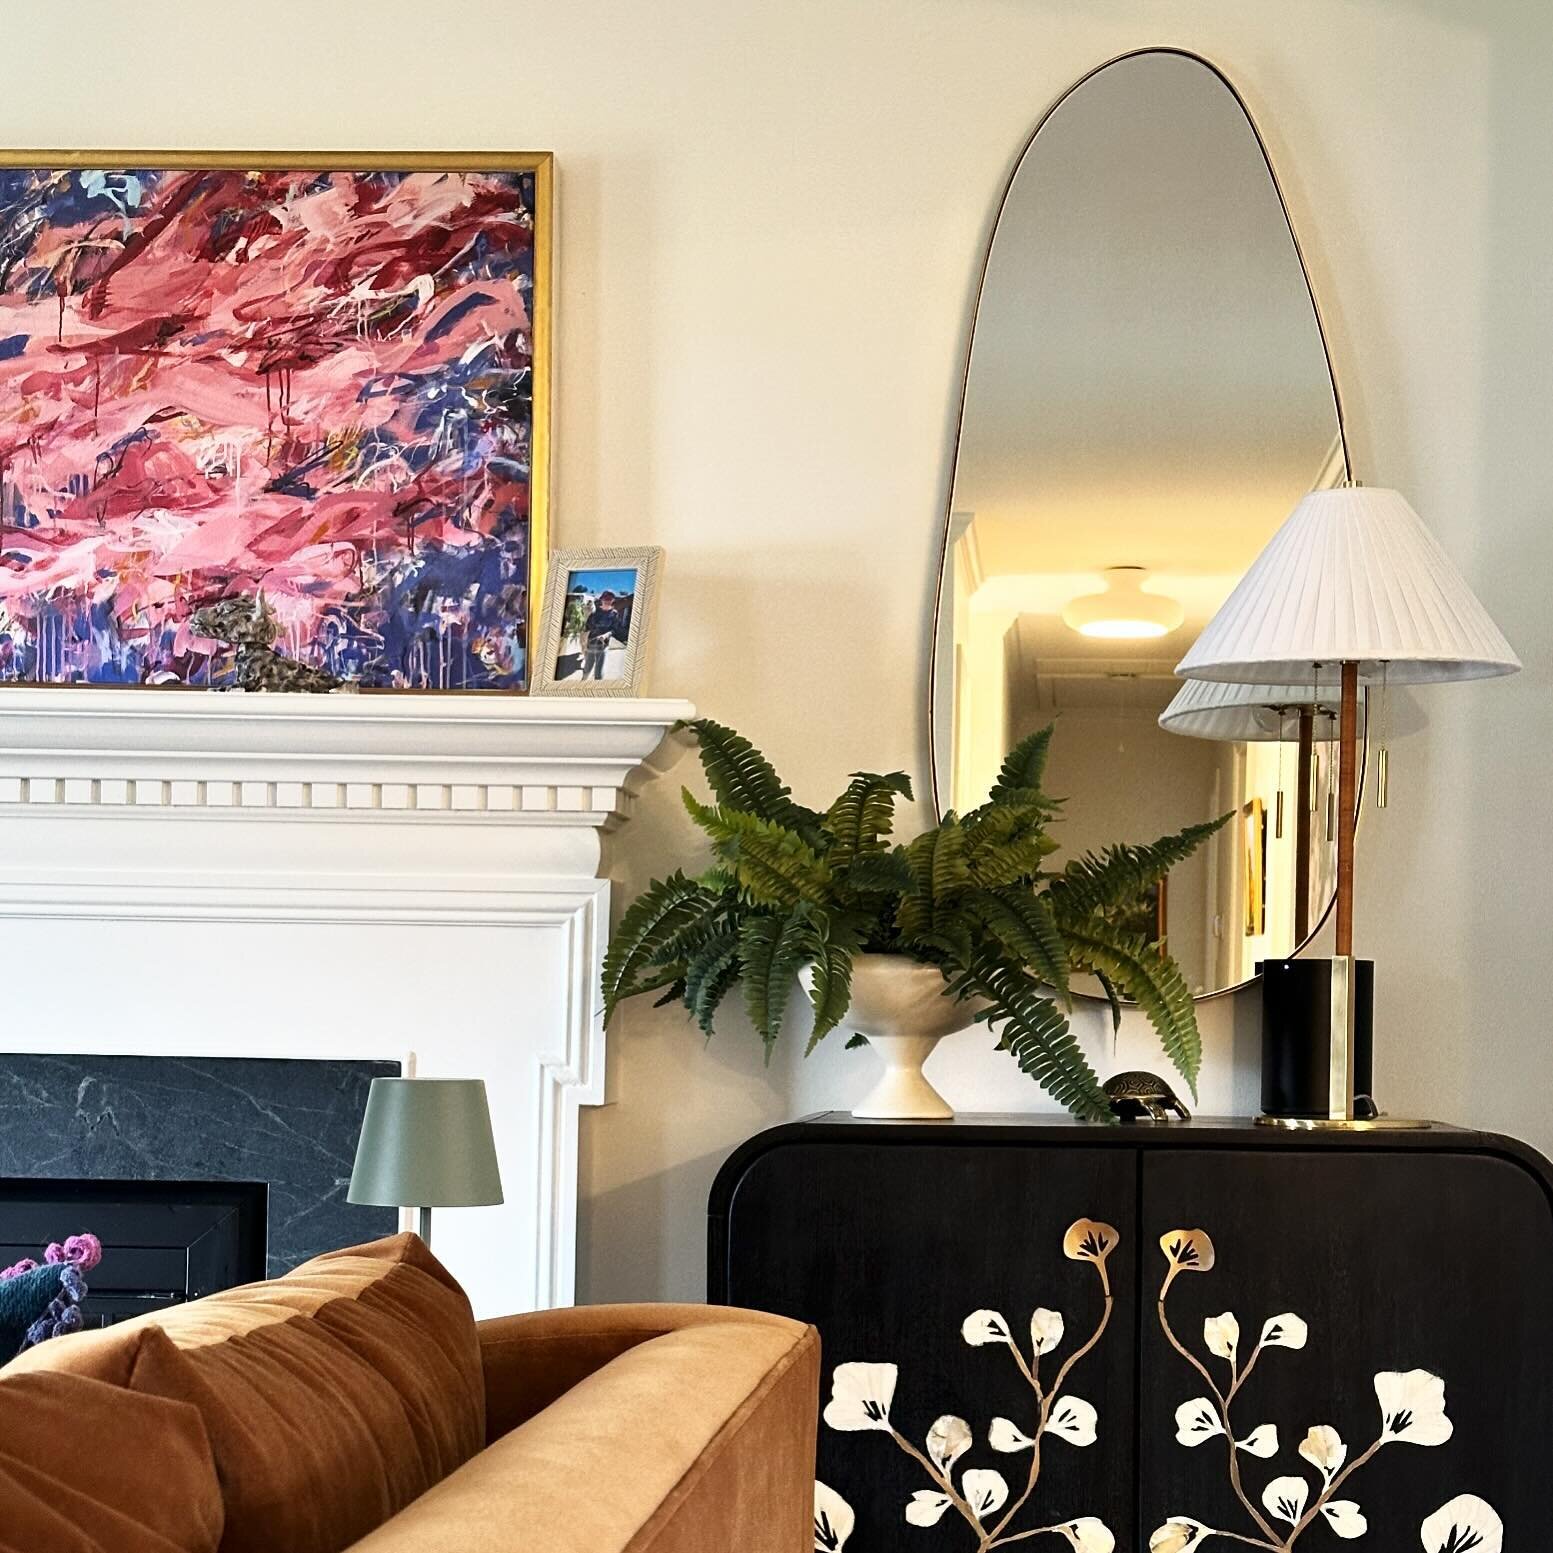 Layers of light, colorful art, plush and patterned fabrics, a whole new layout, &amp; a whole new outlook on life is what we delivered for this awkward Ft Hunt living room. This project, among a few others, will the that magical professional styling 